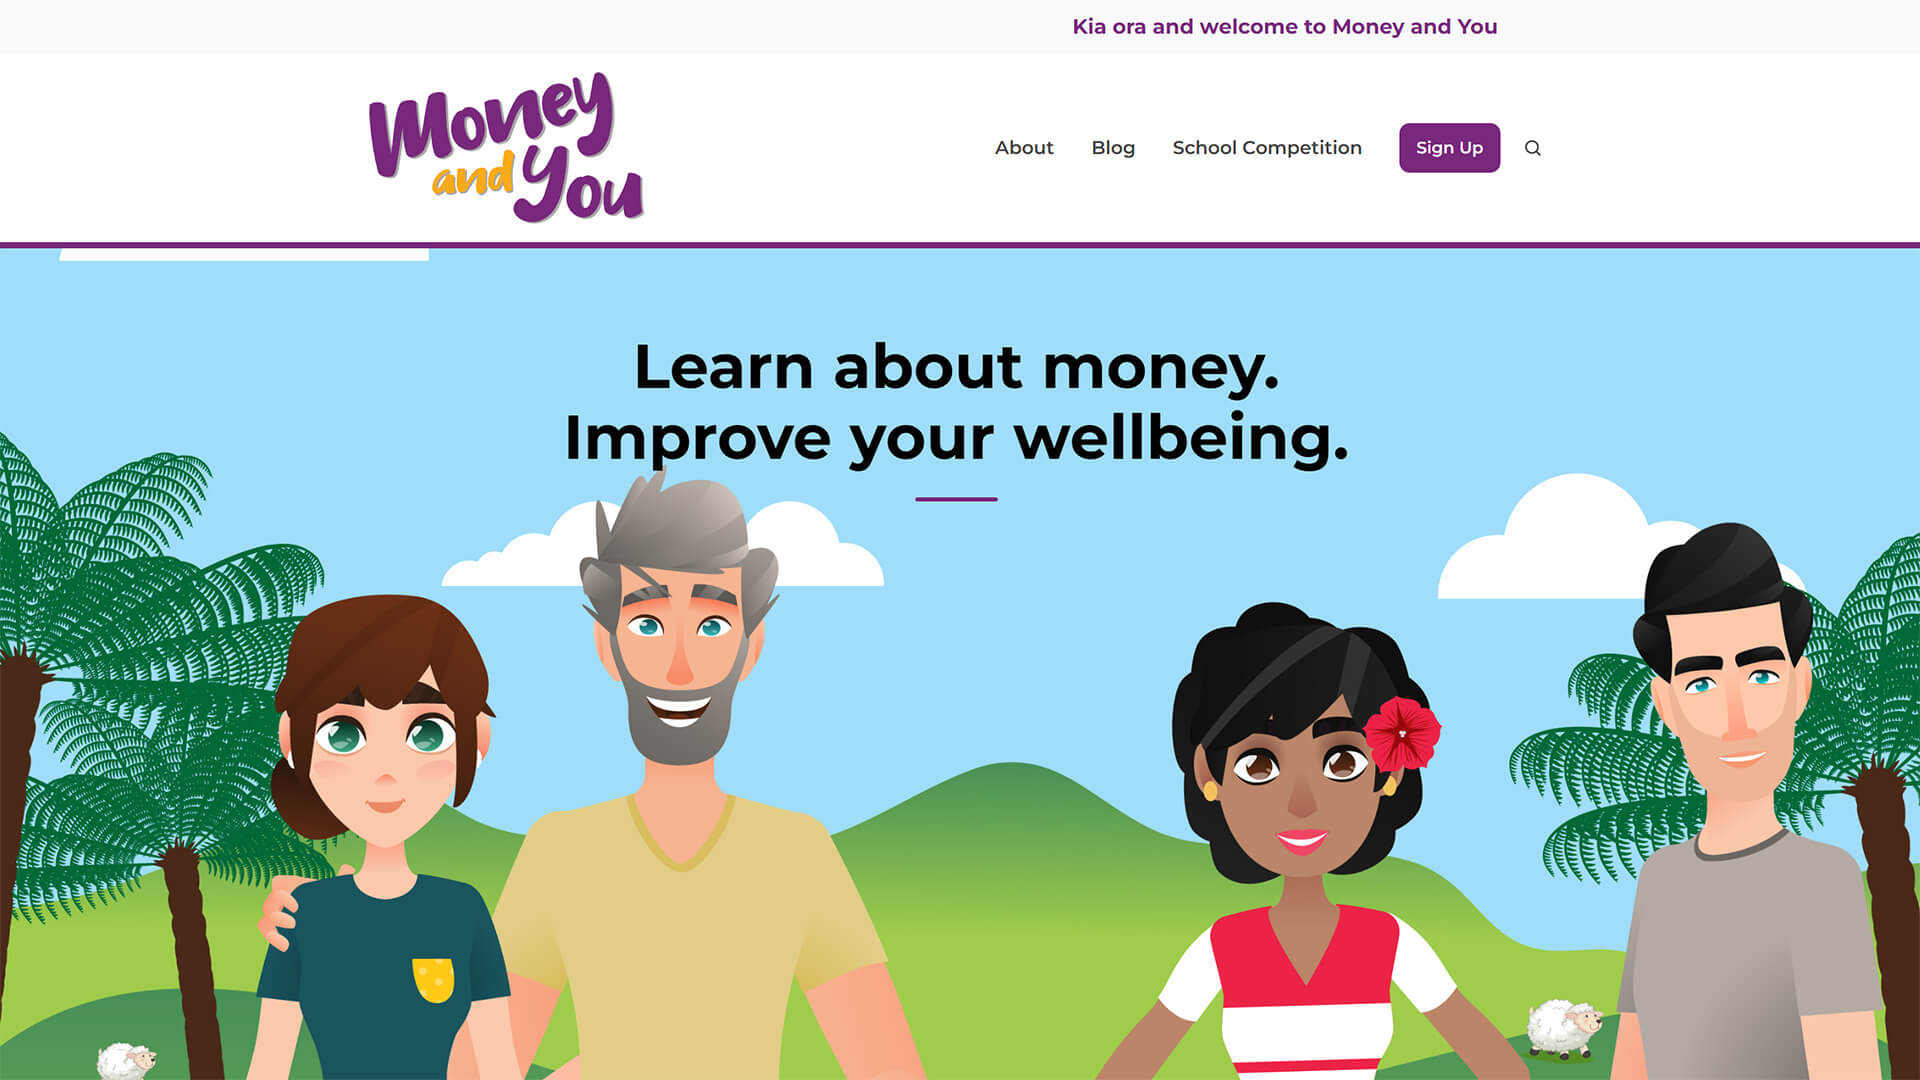 The beautiful moneyandyou.org.nz website created with Act3 on the HubSpot CMS